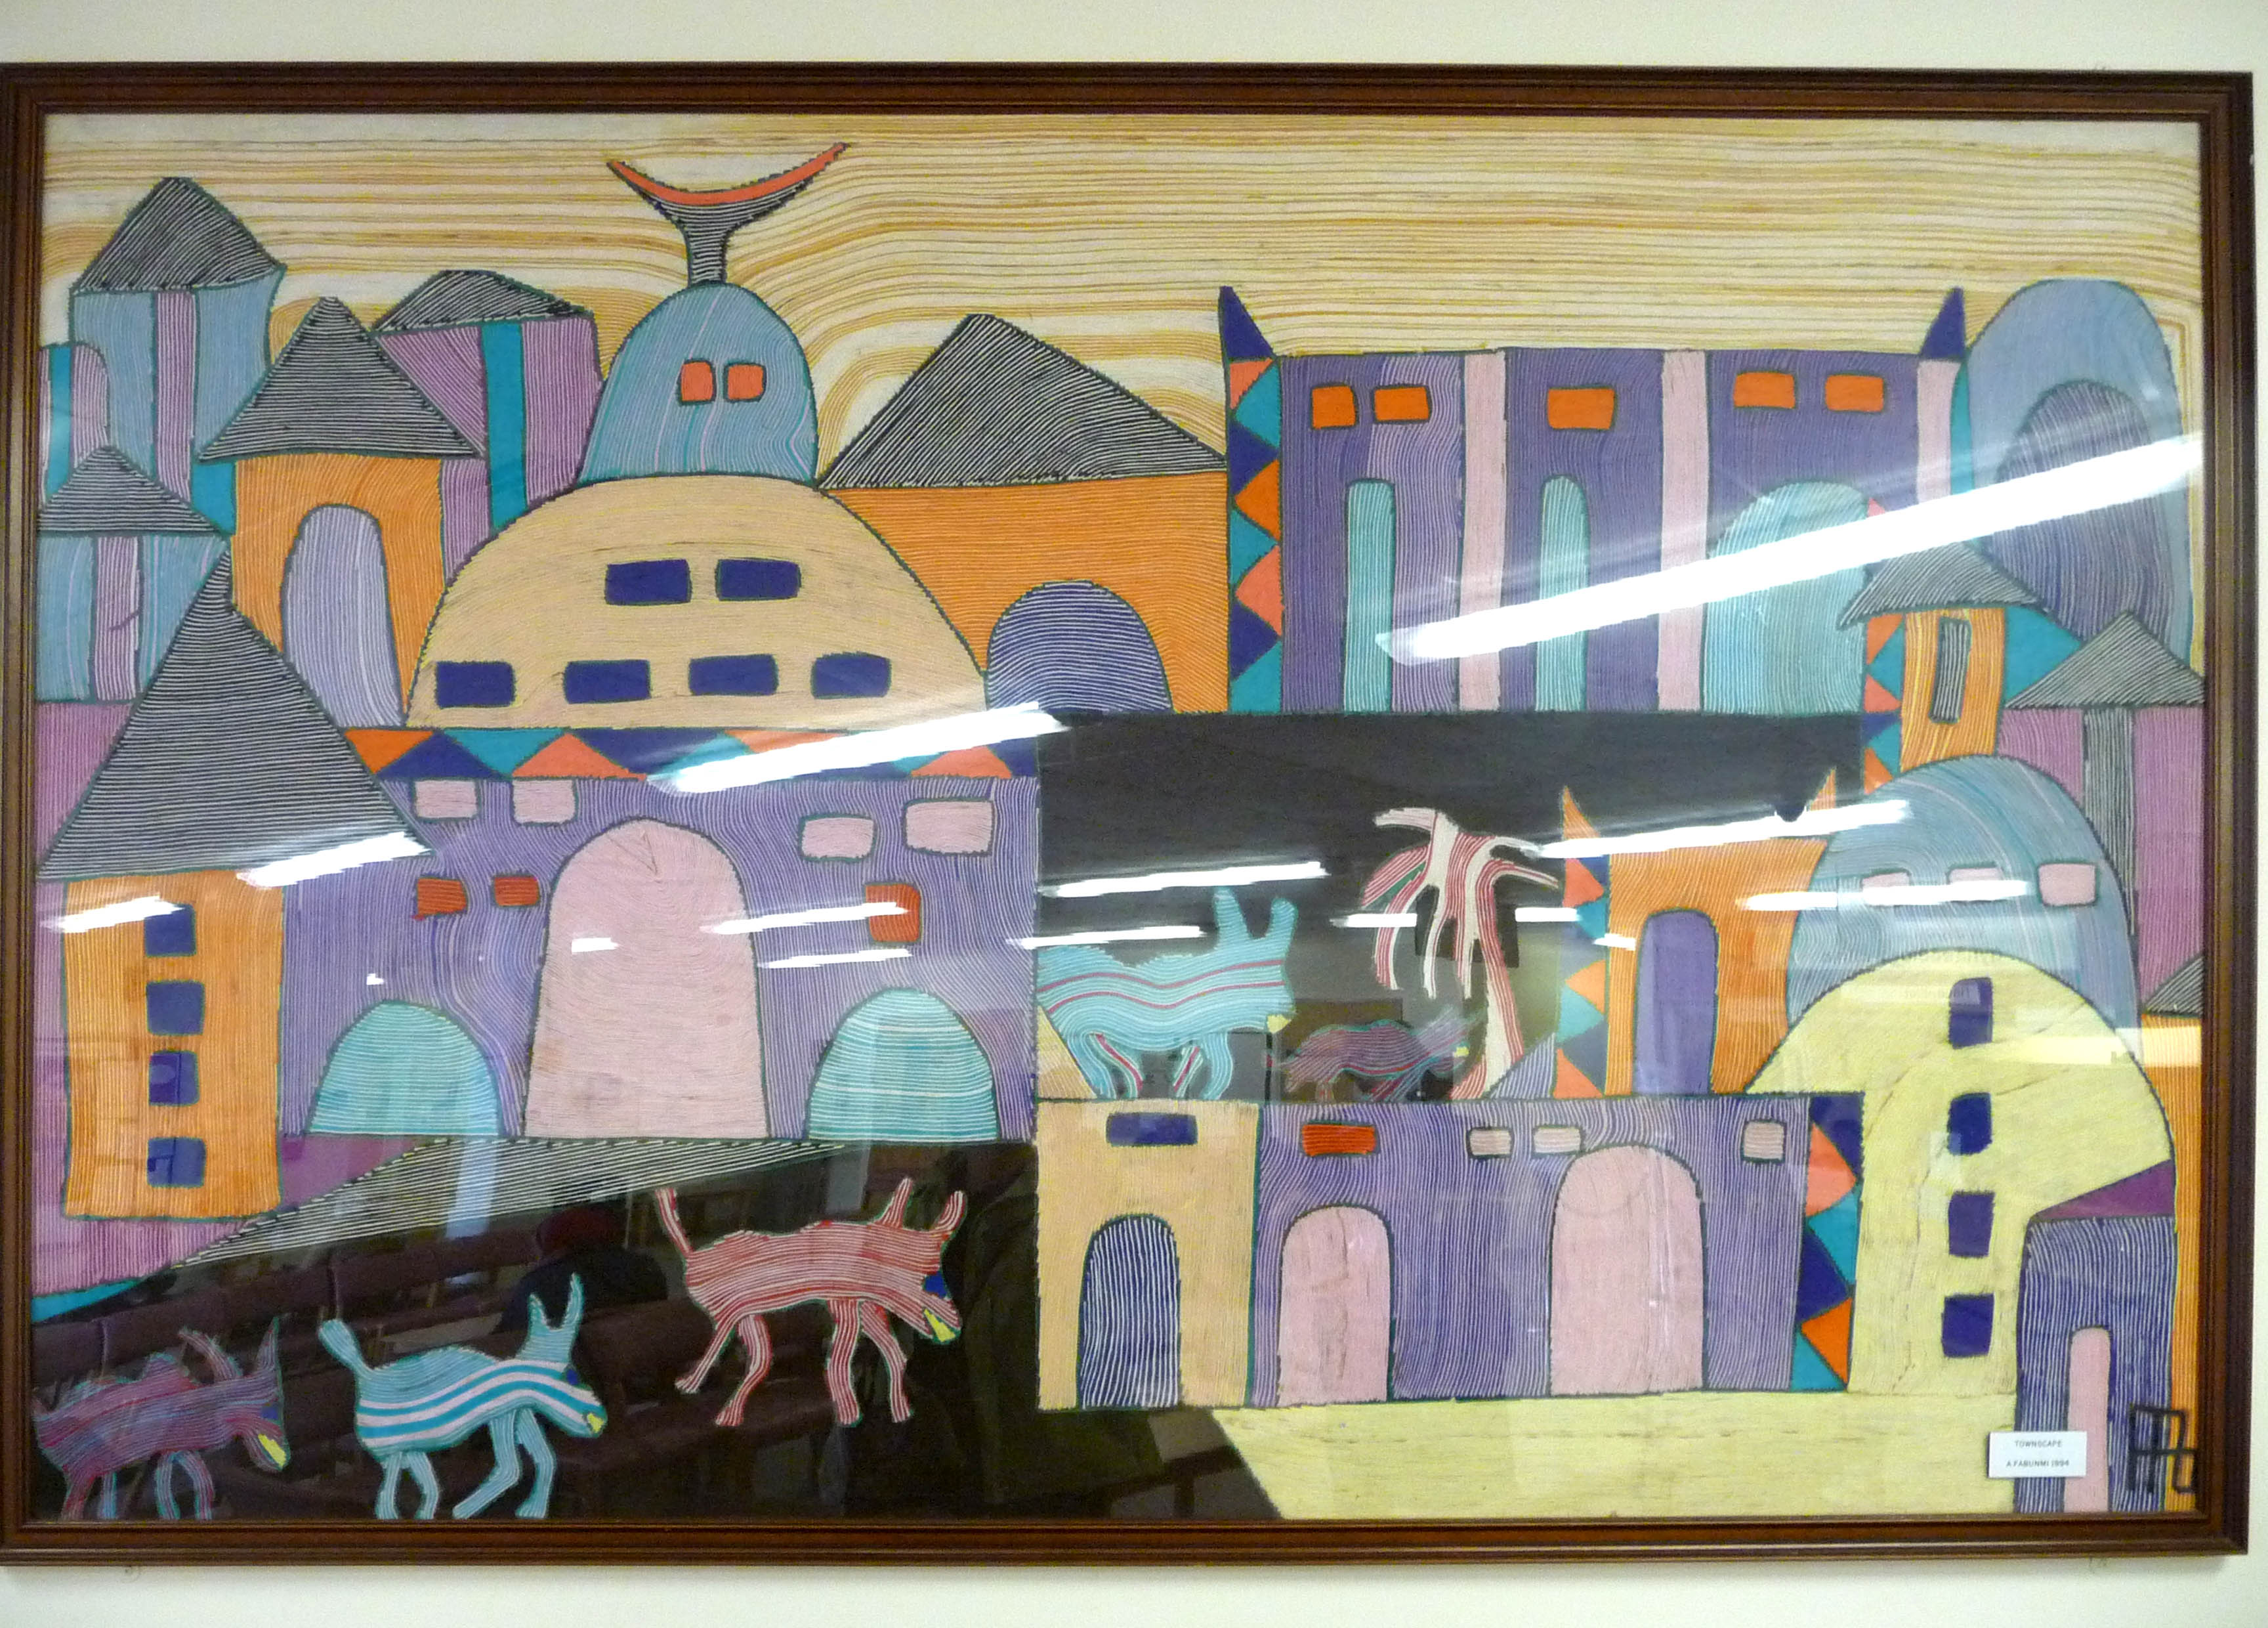 TOWNSCAPE by A. Fabunmi, 1994, wool and threads laid on surface